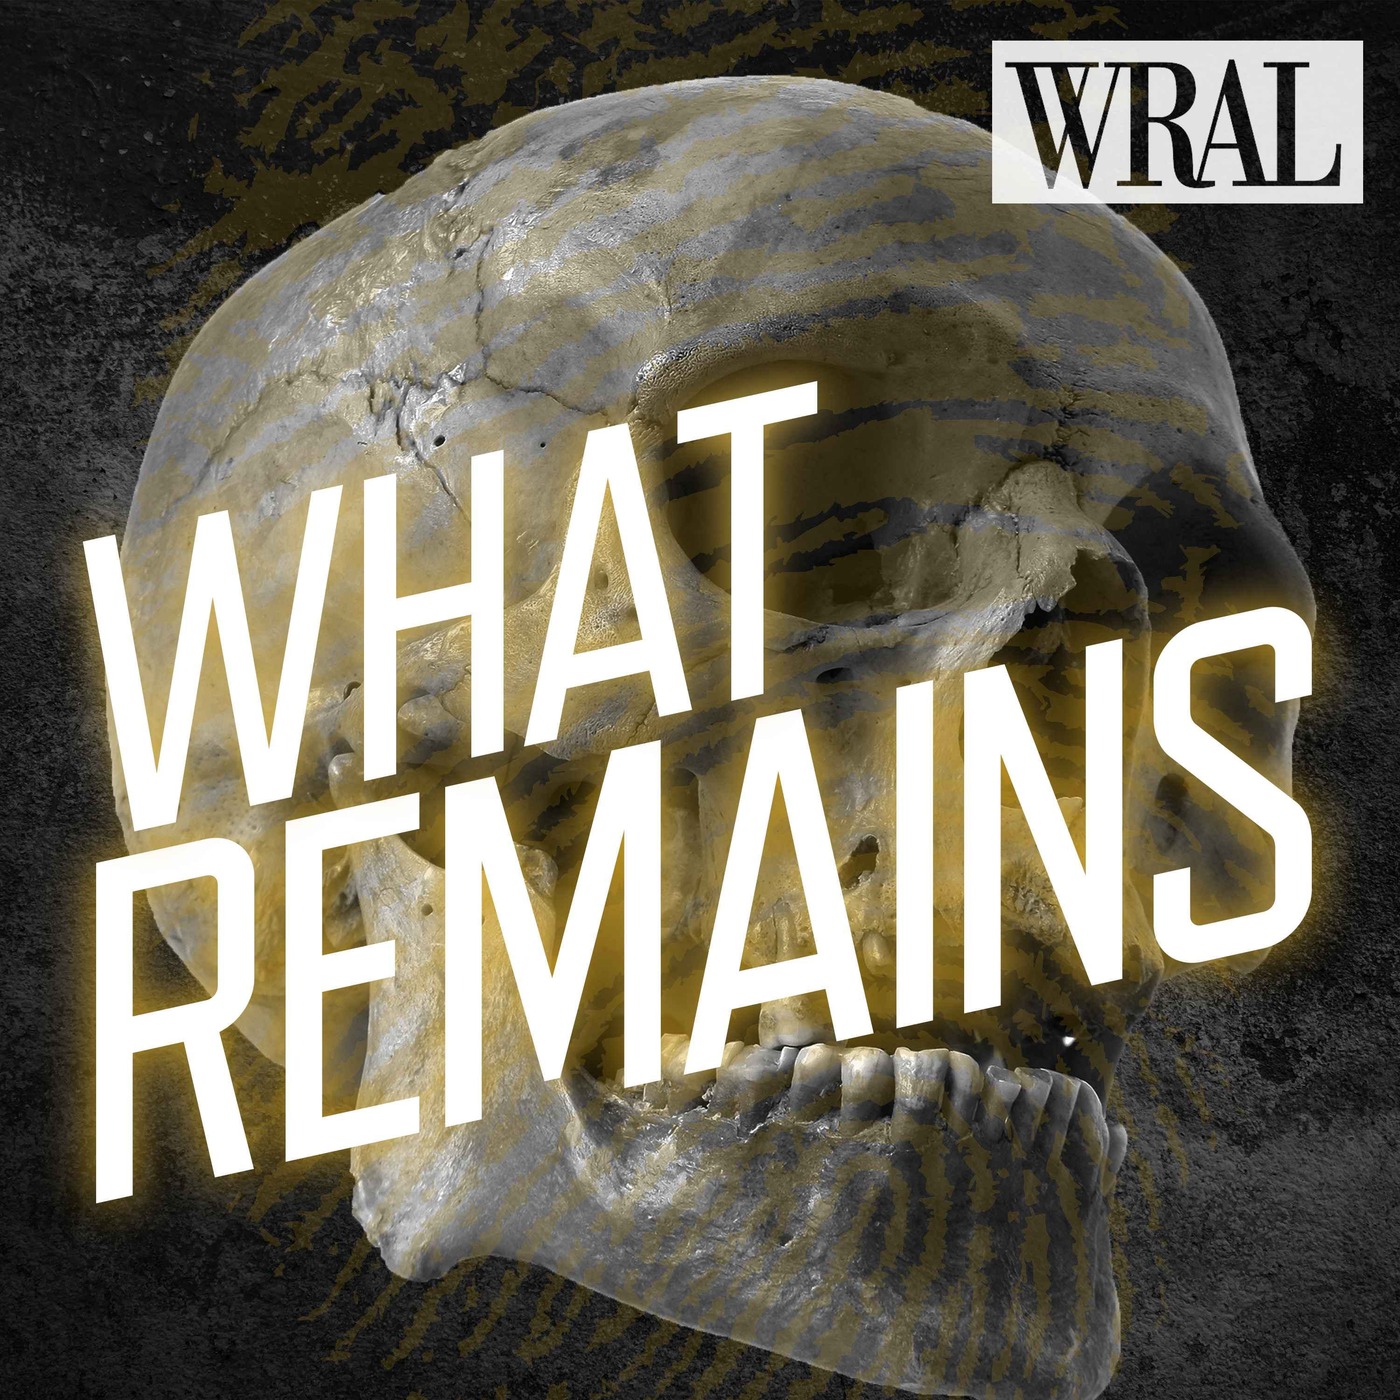 Introducing What Remains | TRAILER